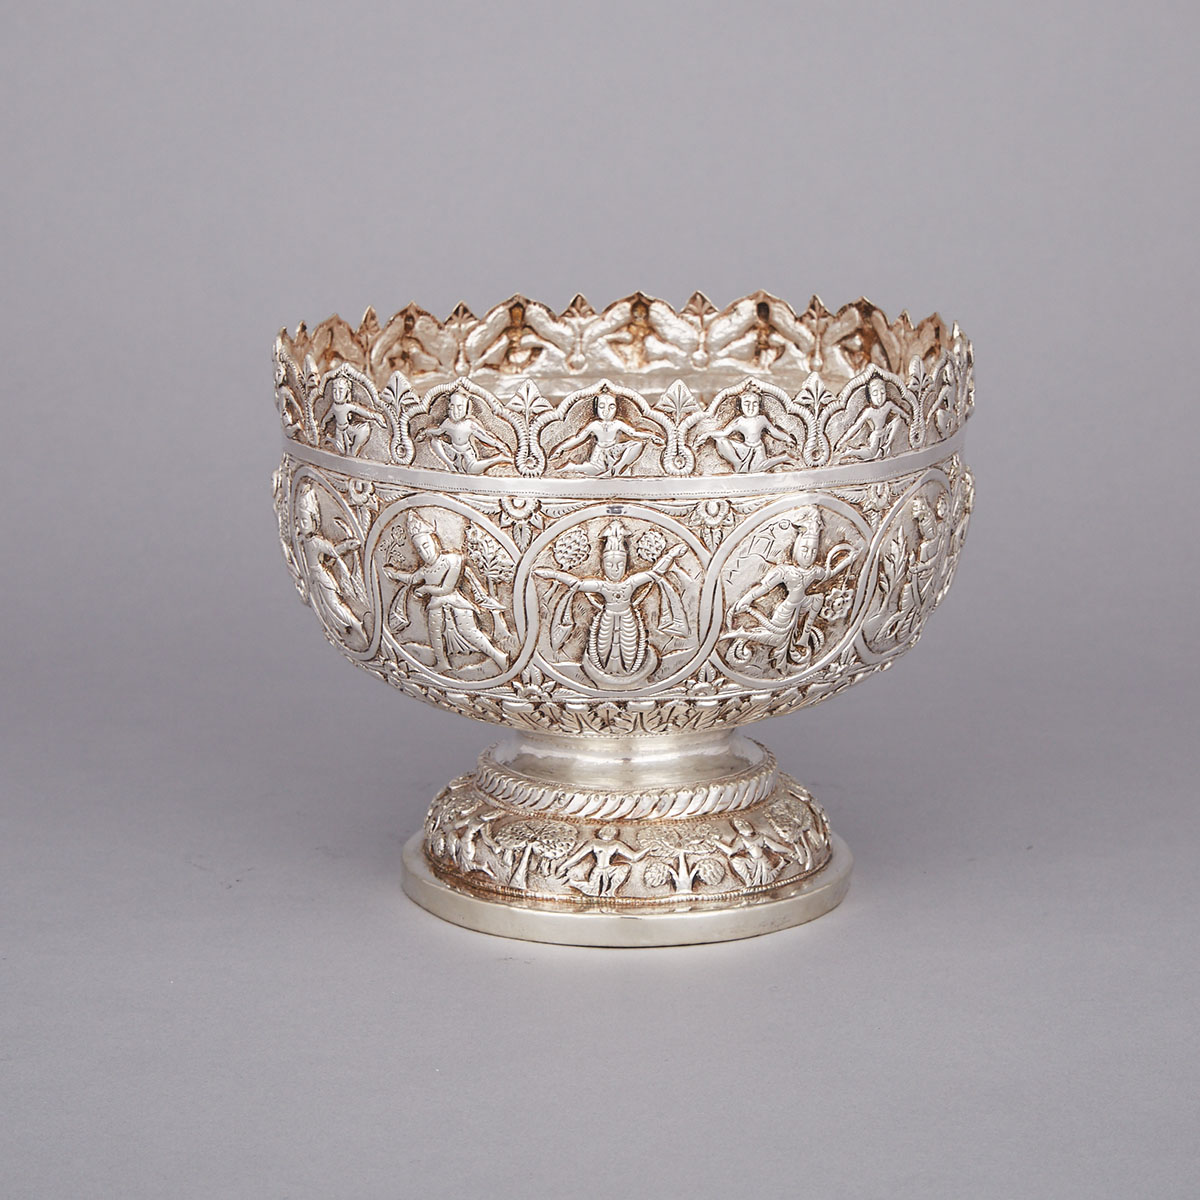 Burmese Silver Footed Bowl, c.1900